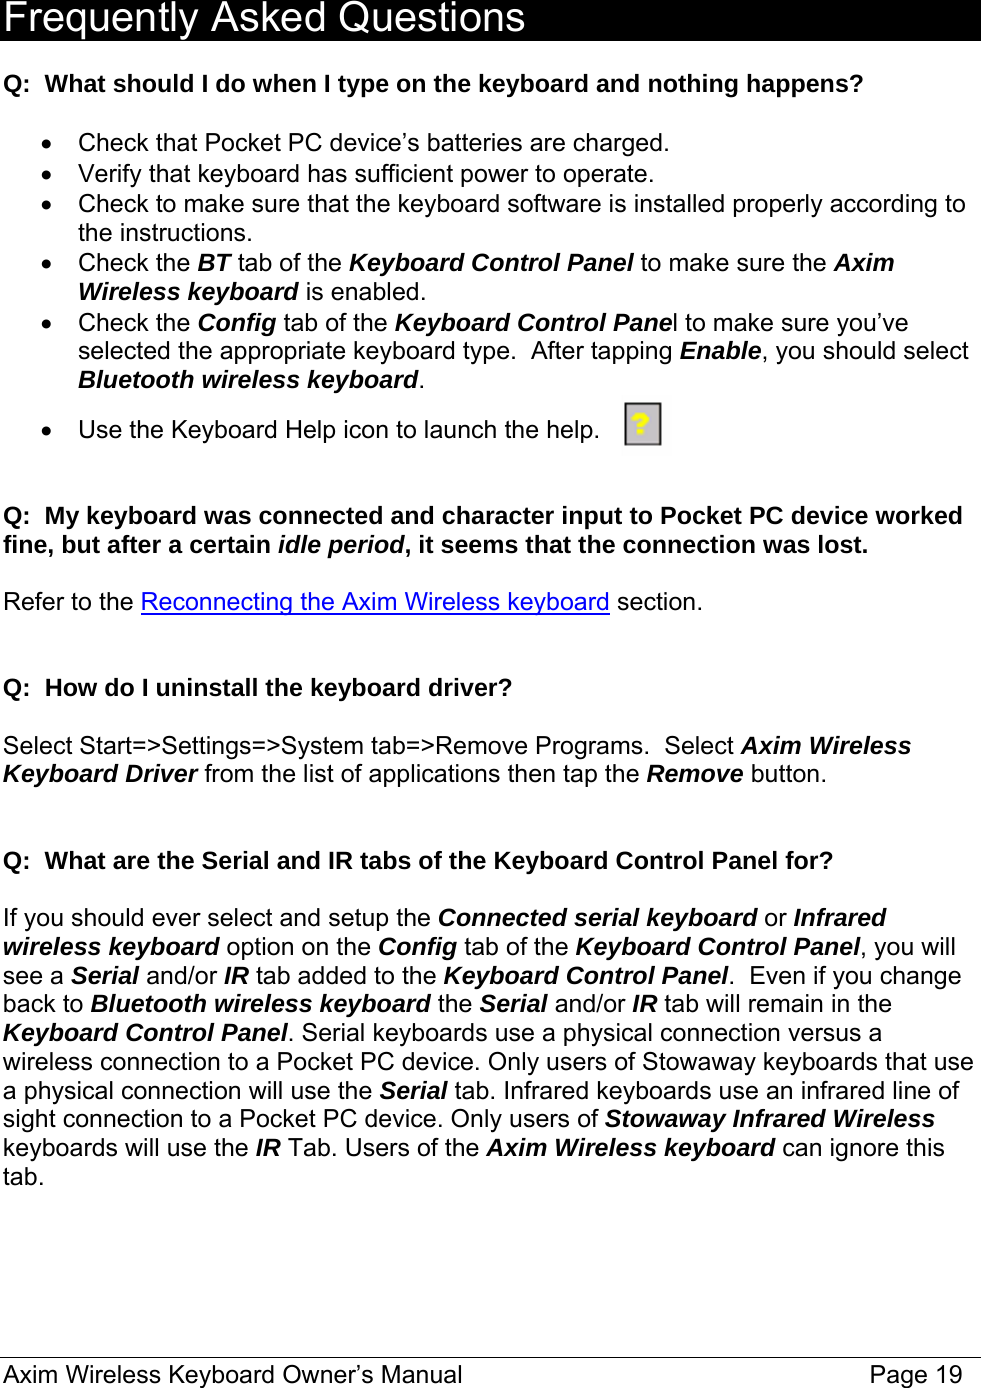  Frequently Asked Questions  Q:  What should I do when I type on the keyboard and nothing happens?  •  Check that Pocket PC device’s batteries are charged. •  Verify that keyboard has sufficient power to operate. •  Check to make sure that the keyboard software is installed properly according to the instructions. • Check the BT tab of the Keyboard Control Panel to make sure the Axim Wireless keyboard is enabled.  • Check the Config tab of the Keyboard Control Panel to make sure you’ve selected the appropriate keyboard type.  After tapping Enable, you should select Bluetooth wireless keyboard.  •  Use the Keyboard Help icon to launch the help.   Q:  My keyboard was connected and character input to Pocket PC device worked fine, but after a certain idle period, it seems that the connection was lost.  Refer to the Reconnecting the Axim Wireless keyboard section.   Q:  How do I uninstall the keyboard driver?  Select Start=&gt;Settings=&gt;System tab=&gt;Remove Programs.  Select Axim Wireless Keyboard Driver from the list of applications then tap the Remove button.   Q:  What are the Serial and IR tabs of the Keyboard Control Panel for?  If you should ever select and setup the Connected serial keyboard or Infrared wireless keyboard option on the Config tab of the Keyboard Control Panel, you will see a Serial and/or IR tab added to the Keyboard Control Panel.  Even if you change back to Bluetooth wireless keyboard the Serial and/or IR tab will remain in the Keyboard Control Panel. Serial keyboards use a physical connection versus a wireless connection to a Pocket PC device. Only users of Stowaway keyboards that use a physical connection will use the Serial tab. Infrared keyboards use an infrared line of sight connection to a Pocket PC device. Only users of Stowaway Infrared Wireless keyboards will use the IR Tab. Users of the Axim Wireless keyboard can ignore this tab.  Axim Wireless Keyboard Owner’s Manual                                                                 Page 19 